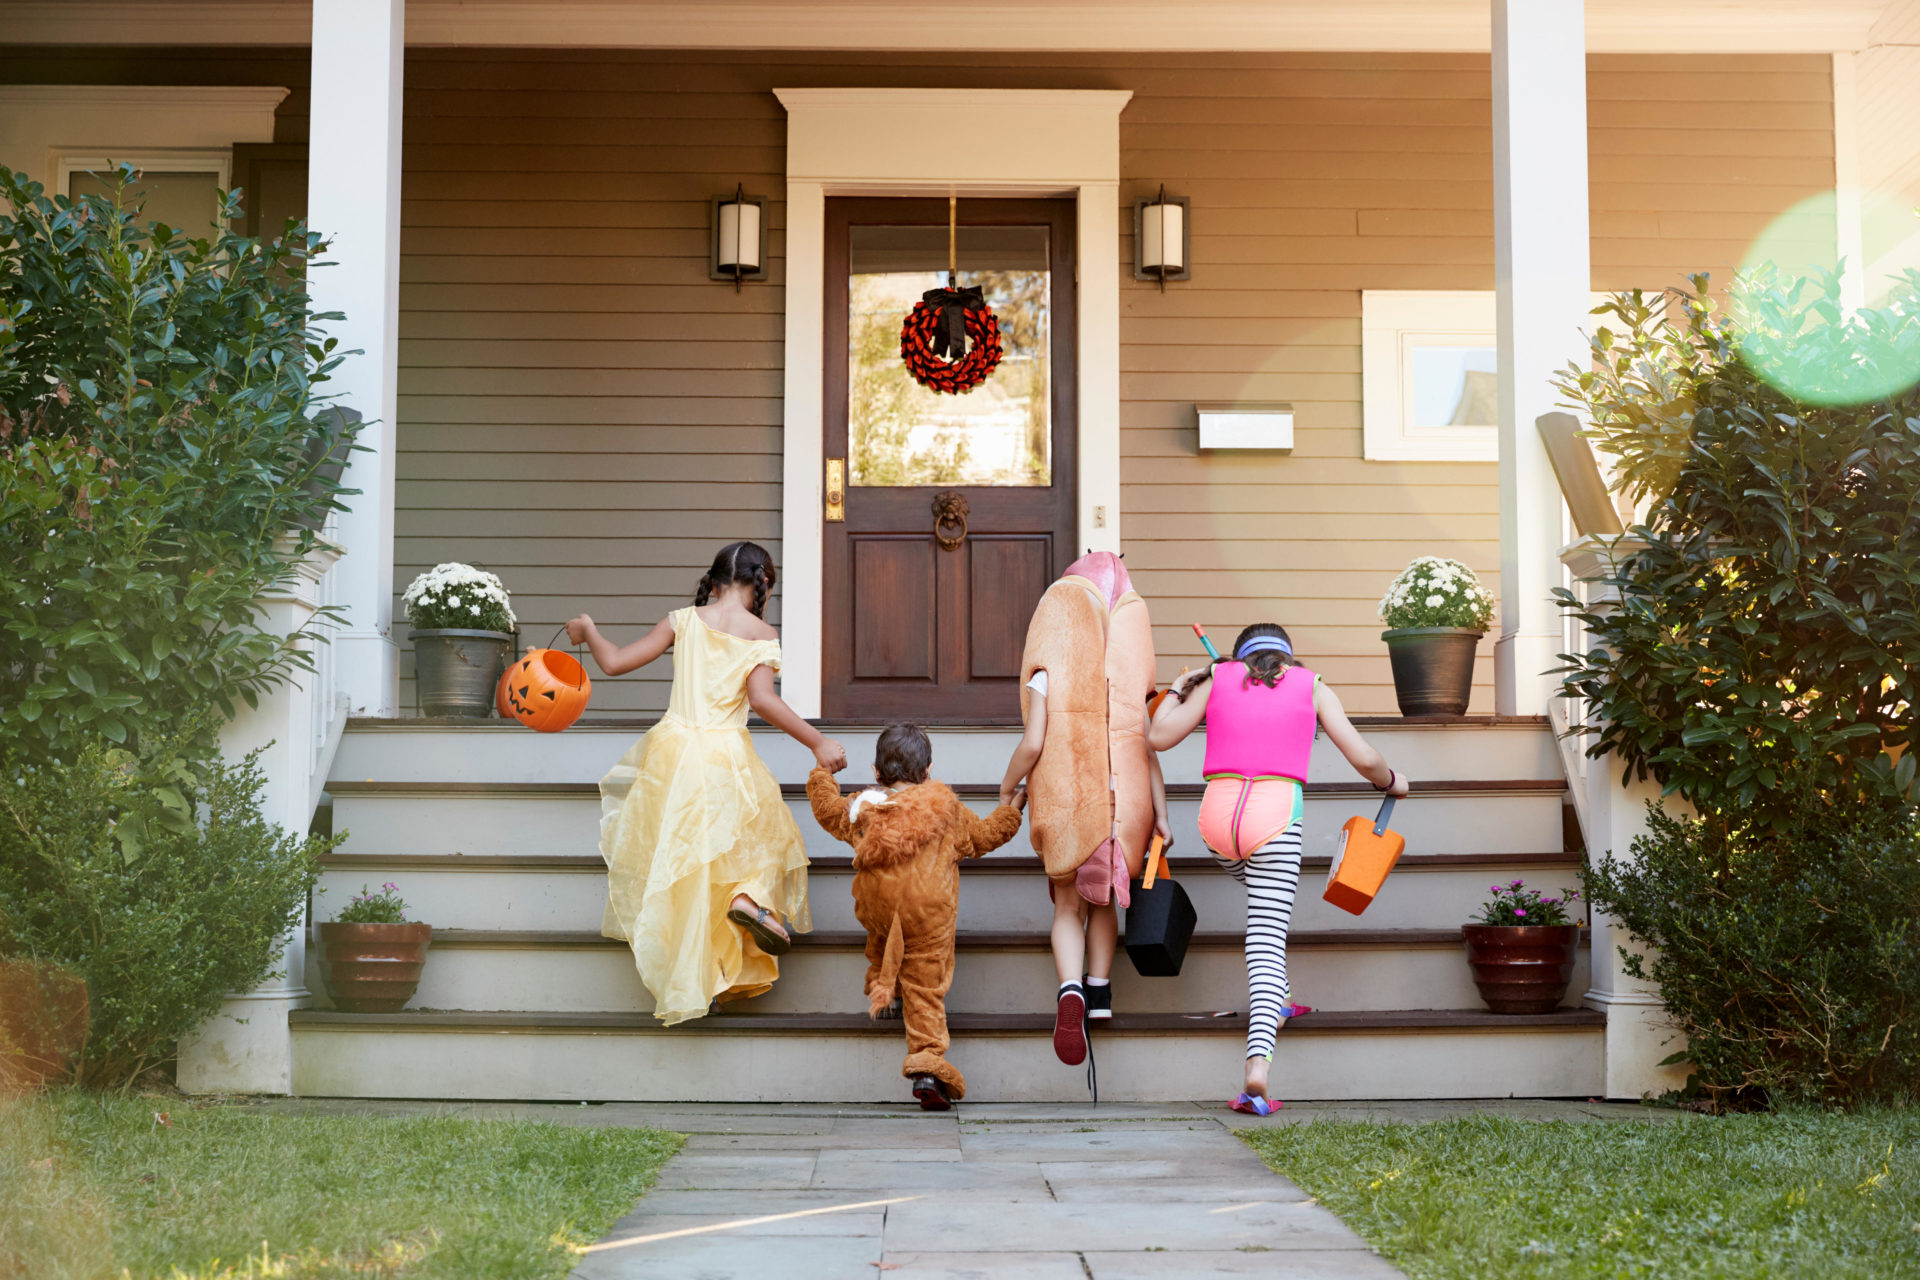 Children Wearing Halloween Costumes For Trick Or Treating.